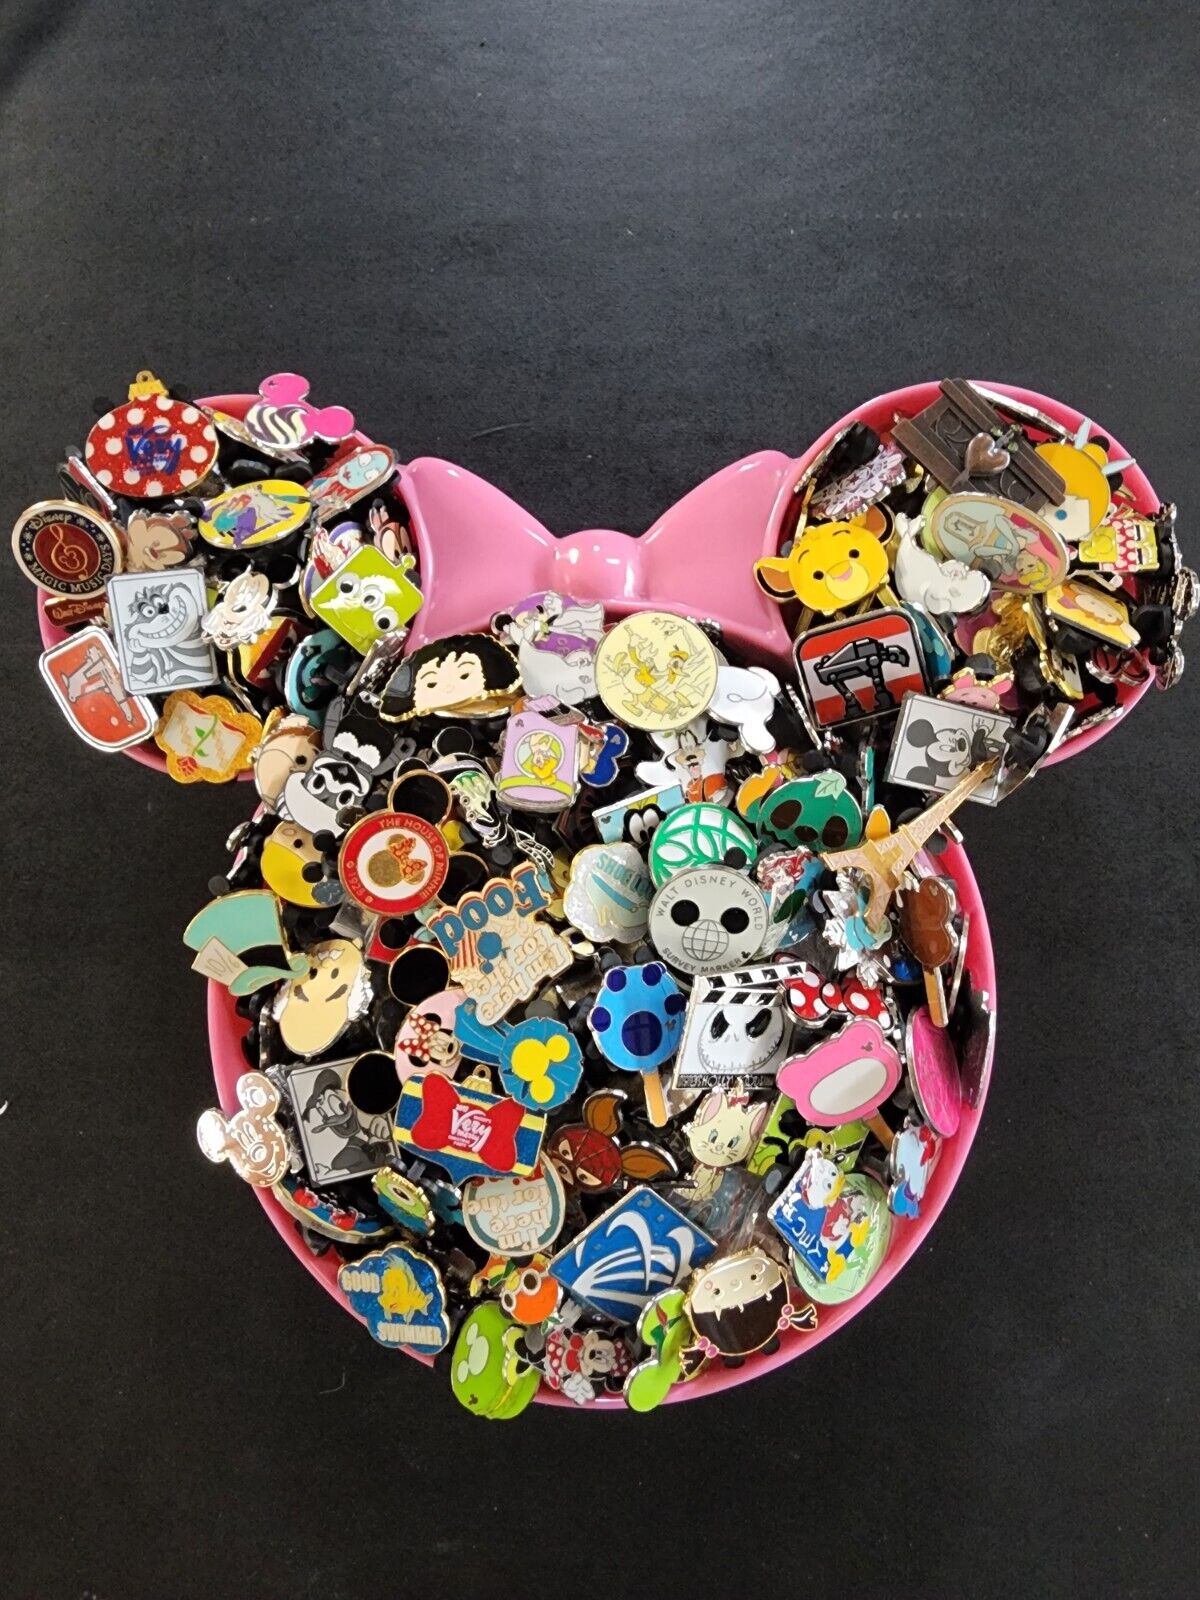 DISNEY PIN TRADING LOT 100, NO DOUBLES, FREE PRIORITY SHIPPING, 100% TRADABLE